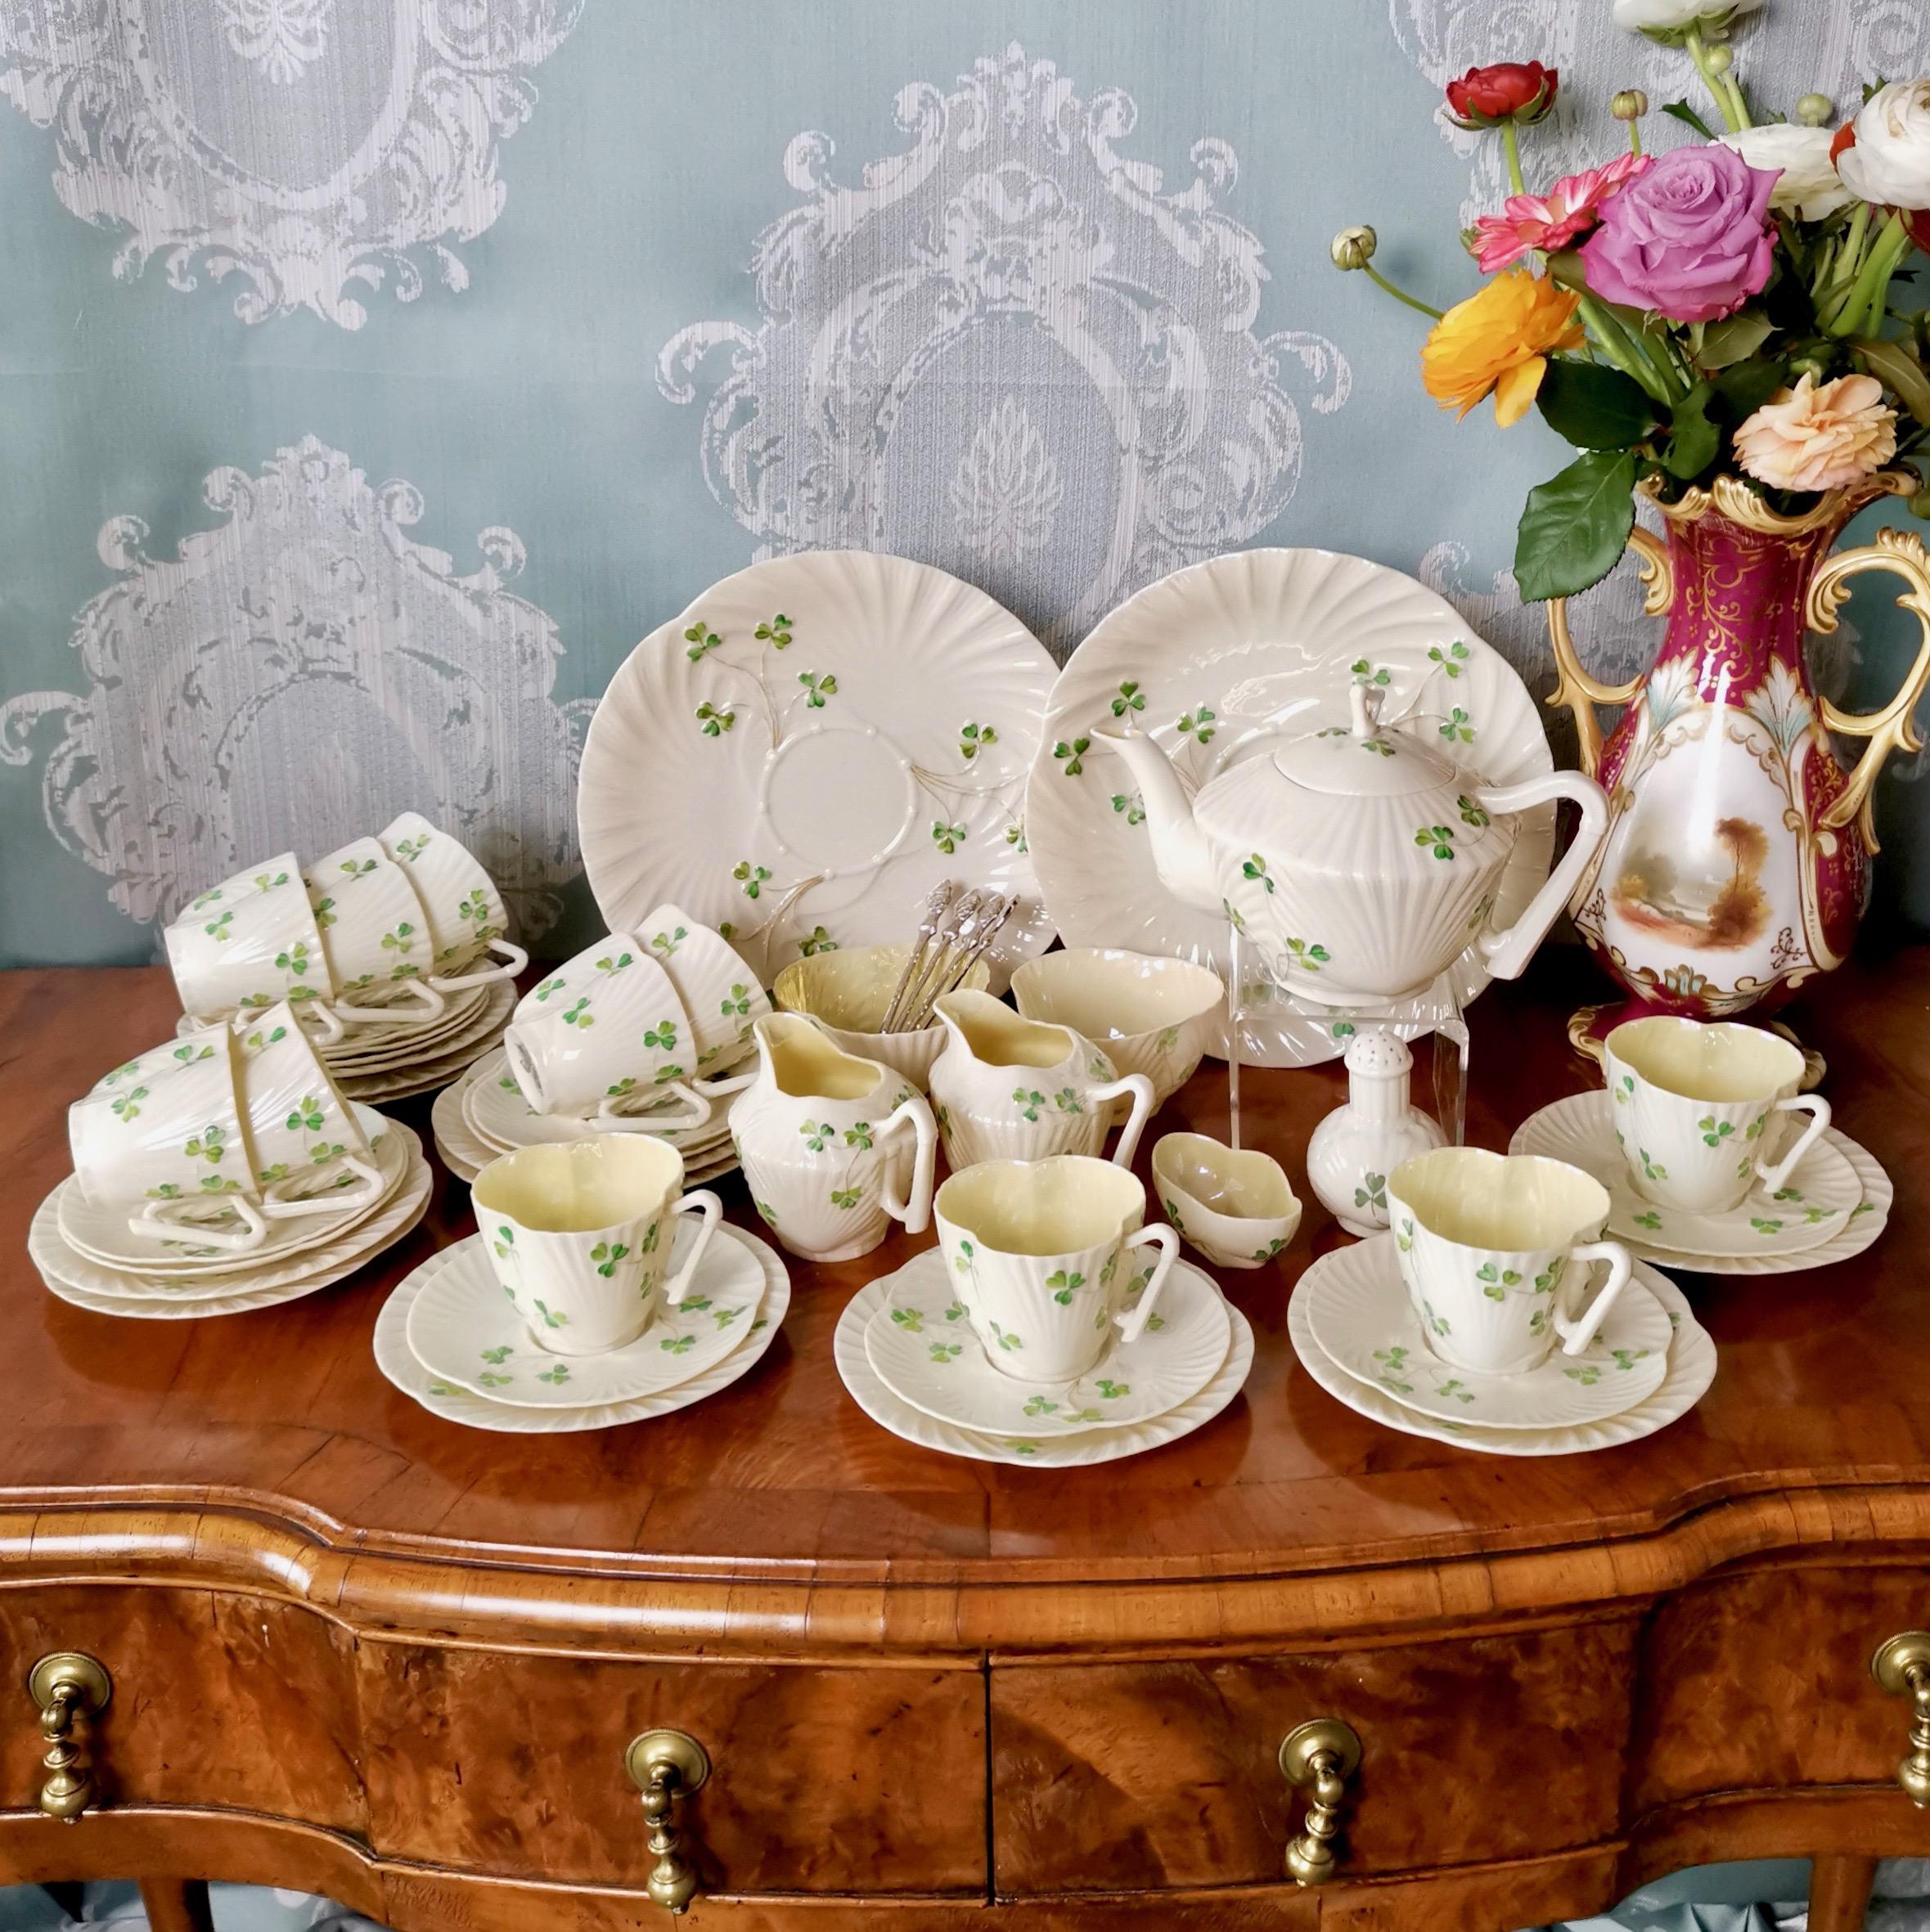 This is a very stunning and large Belleek tea service in the 